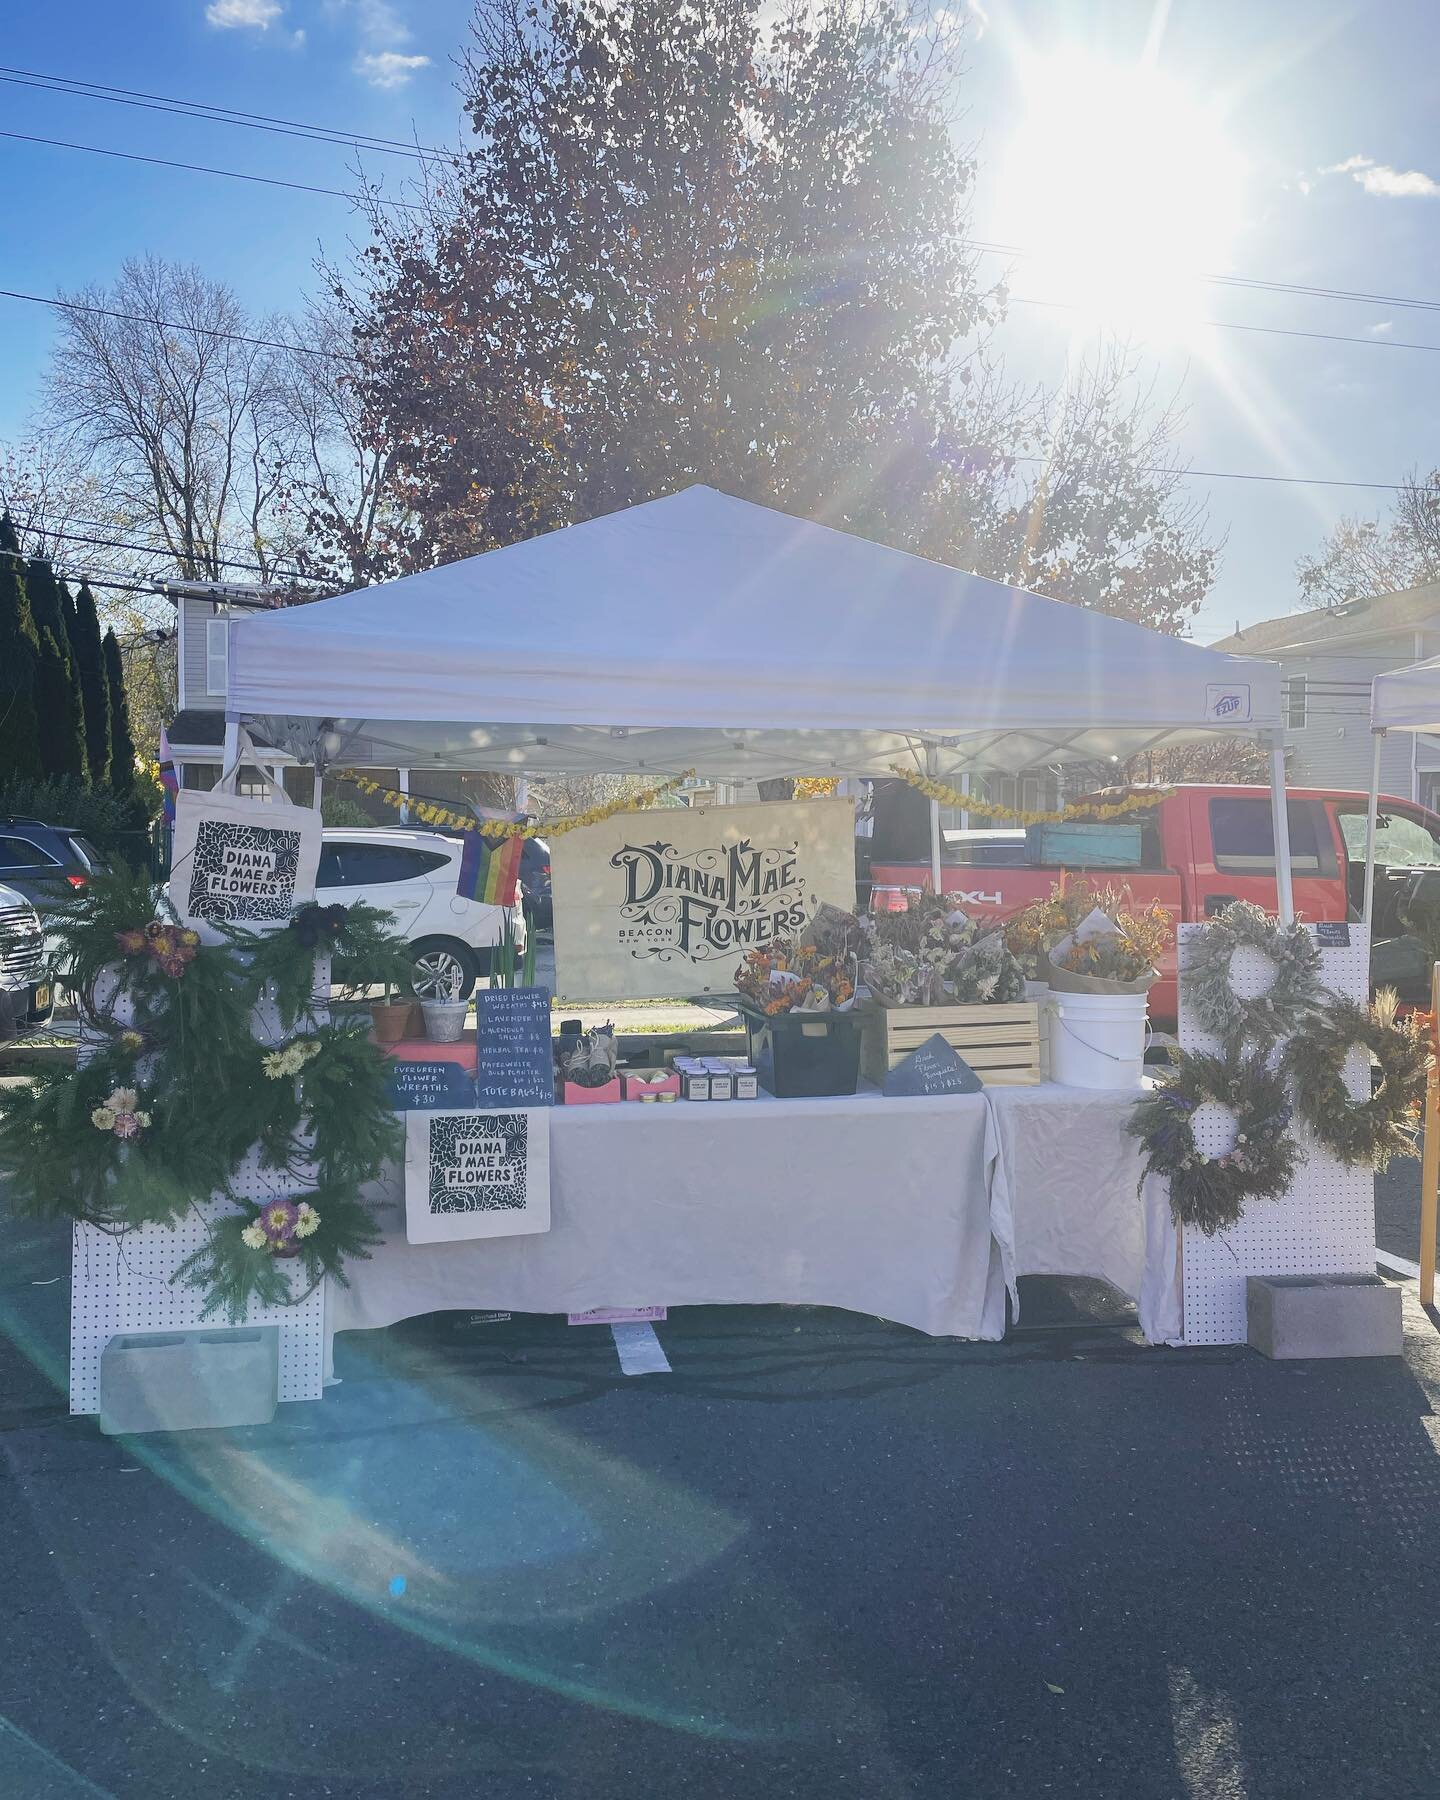 What a gorg Sunday for our first day of the Winter Market @beaconfarmersmarket ! I&rsquo;m here with all your fave DMF winter products:
🌲 evergreen &amp; dried flower wreaths
💐 dried flower bouquets 
🌱 paperwhite planters
👋 healing calendula salv